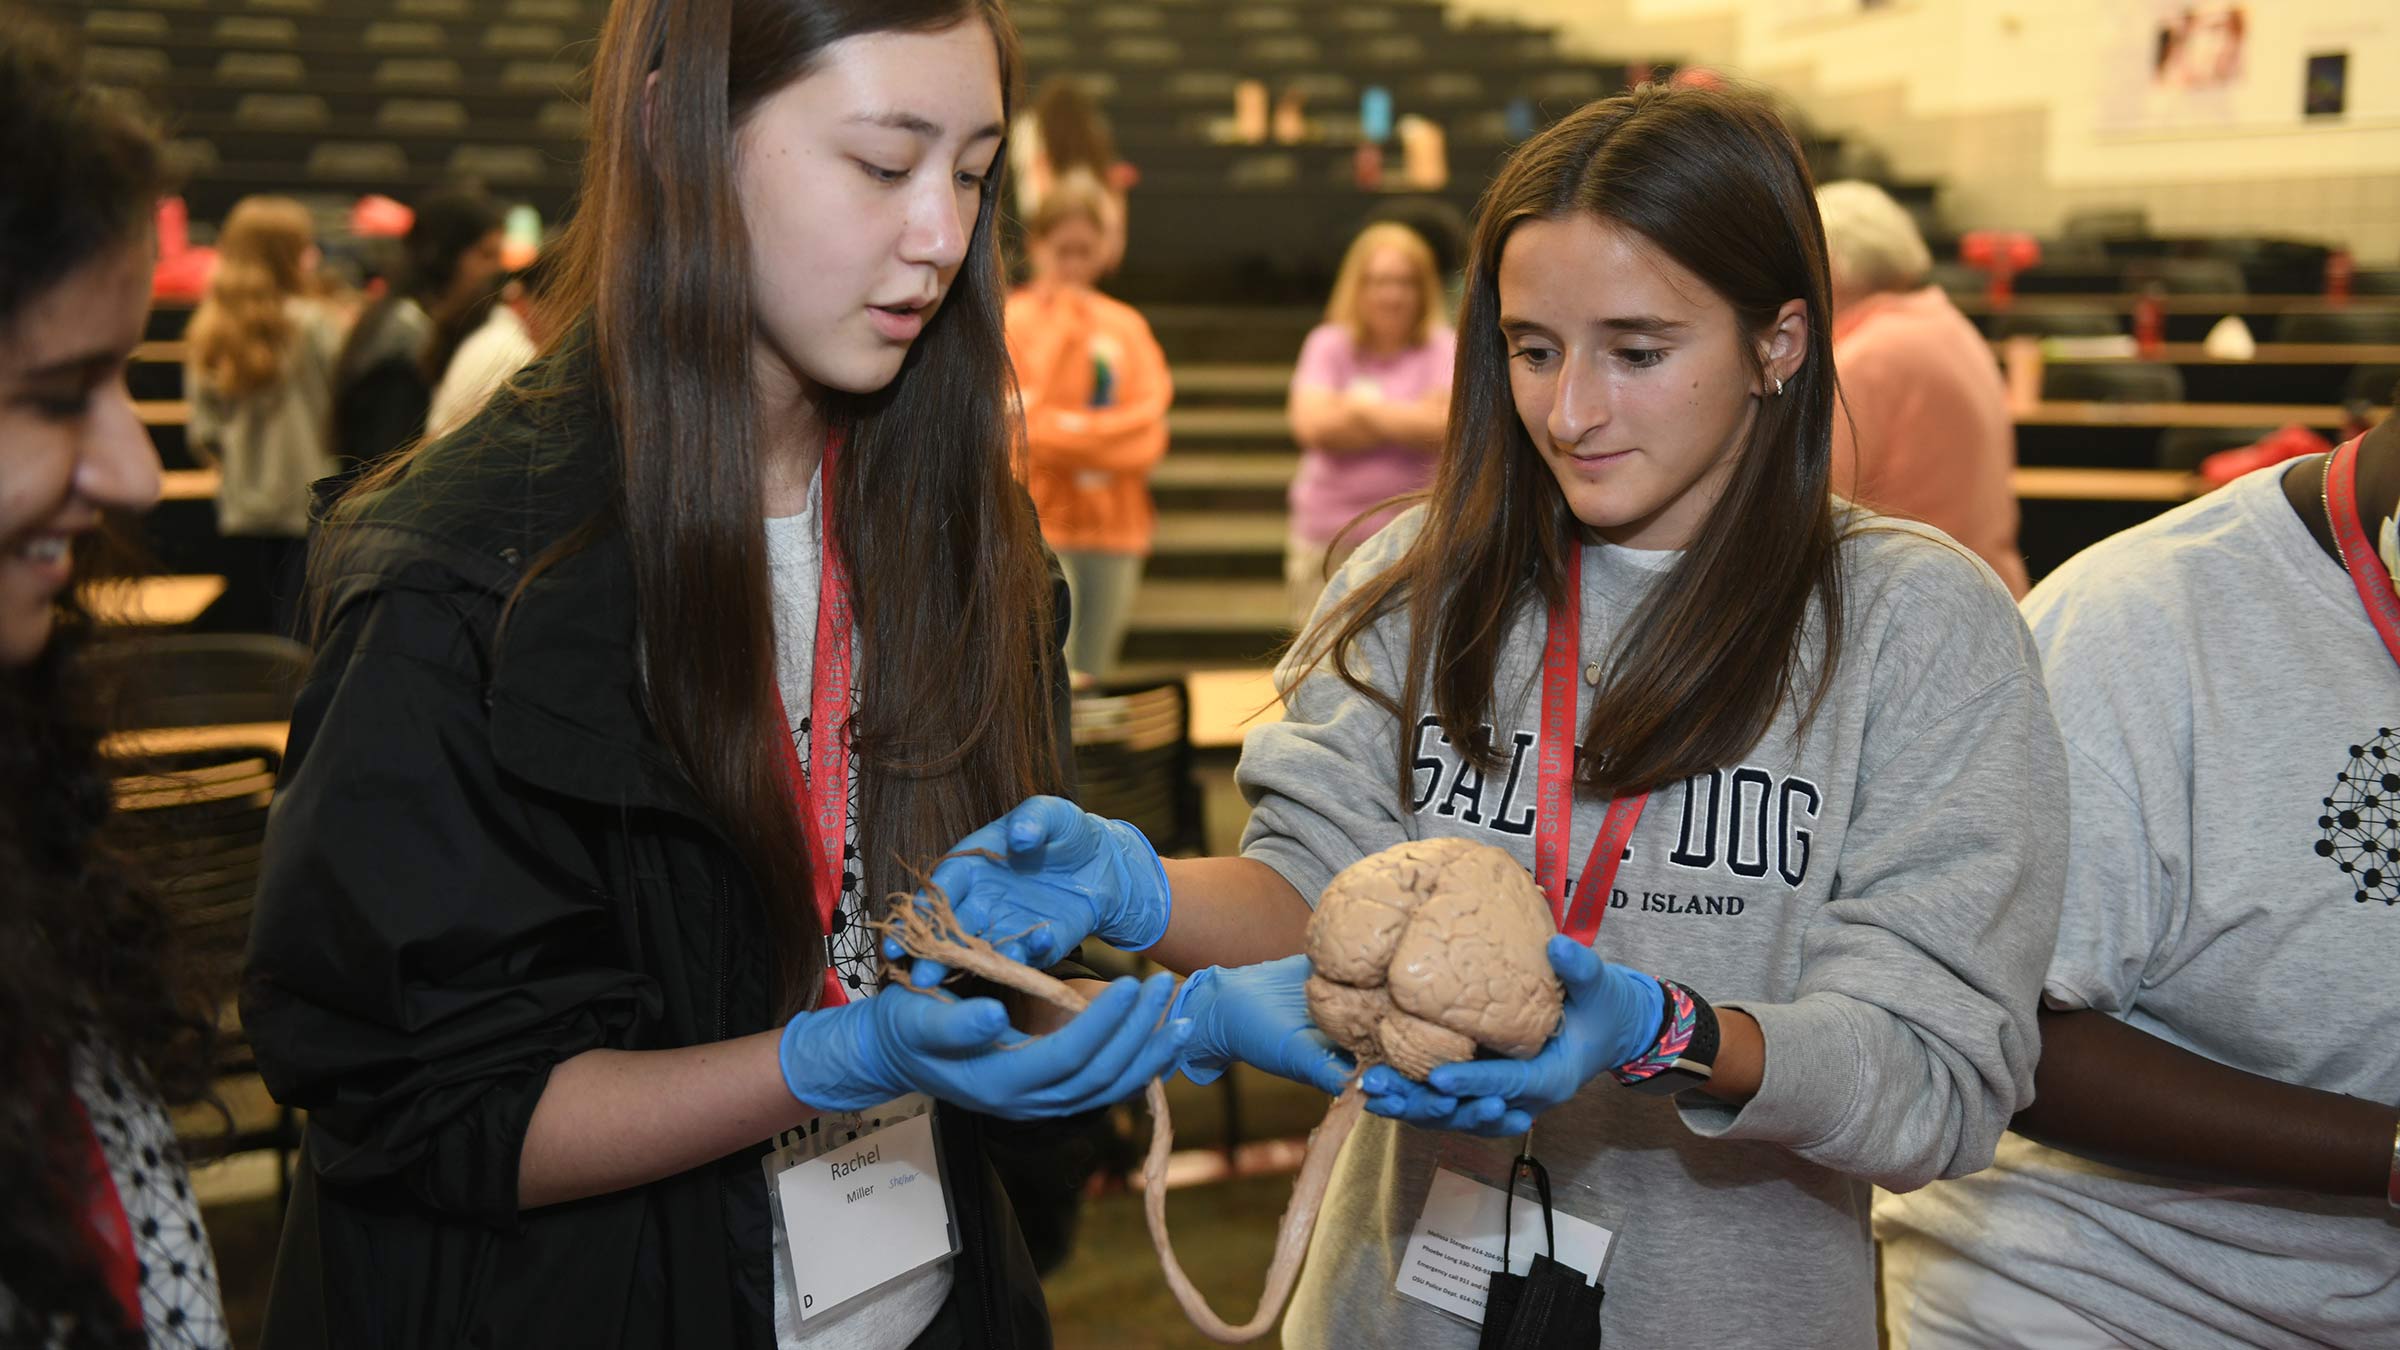 Ohio State’s STEM summer camps expose high school students to new career paths